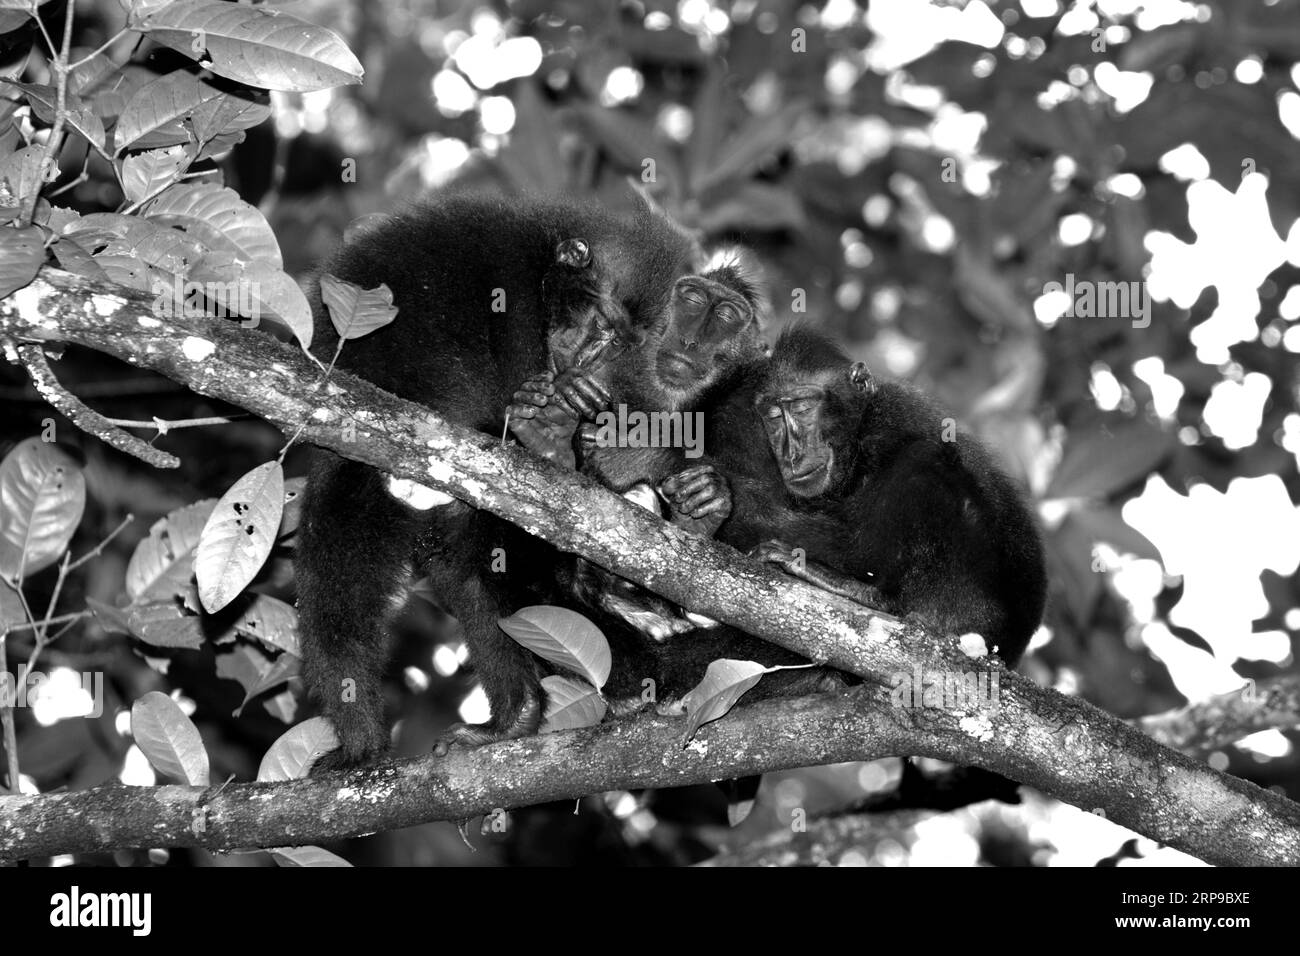 A group of black-crested macaques (Macaca nigra) is photographed as they are taking a nap on a tree branch in Tangkoko forest, North Sulawesi, Indonesia. Suitable sleeping sites for crested macaques are limited, frequently reused, and shared sequentially, but not used simultaneously, according to an August 2023 research paper by a team of primatologists led by Rismayanti Rismayanti, which is published by International Journal of Primatology (accessed through Springer). Macaca nigra is considered a key species in their habitat, an important 'umbrella species' for biodiversity conservation. Stock Photo